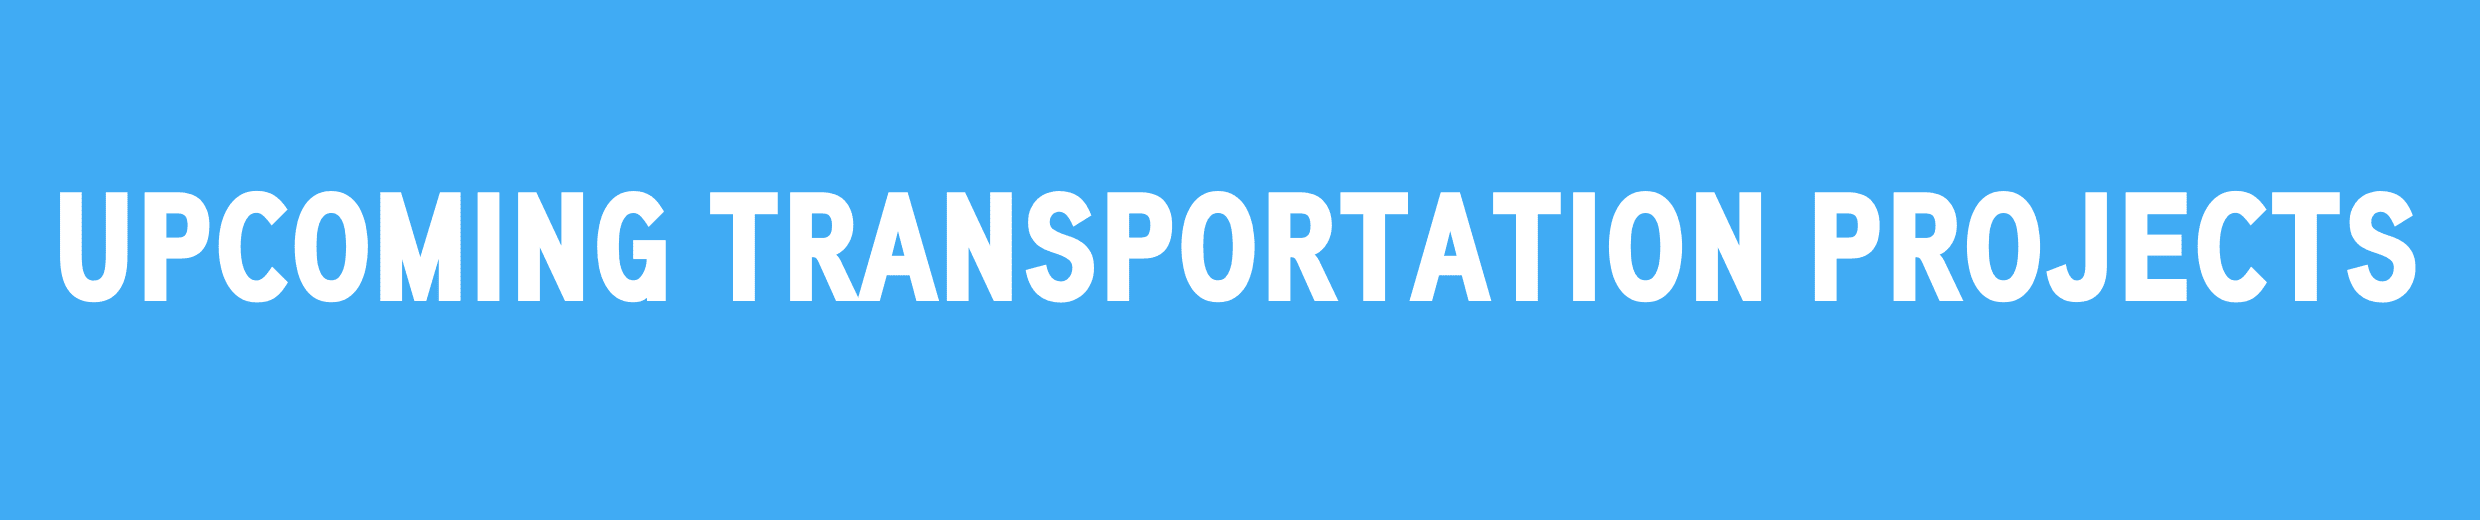 upcoming transportation projects